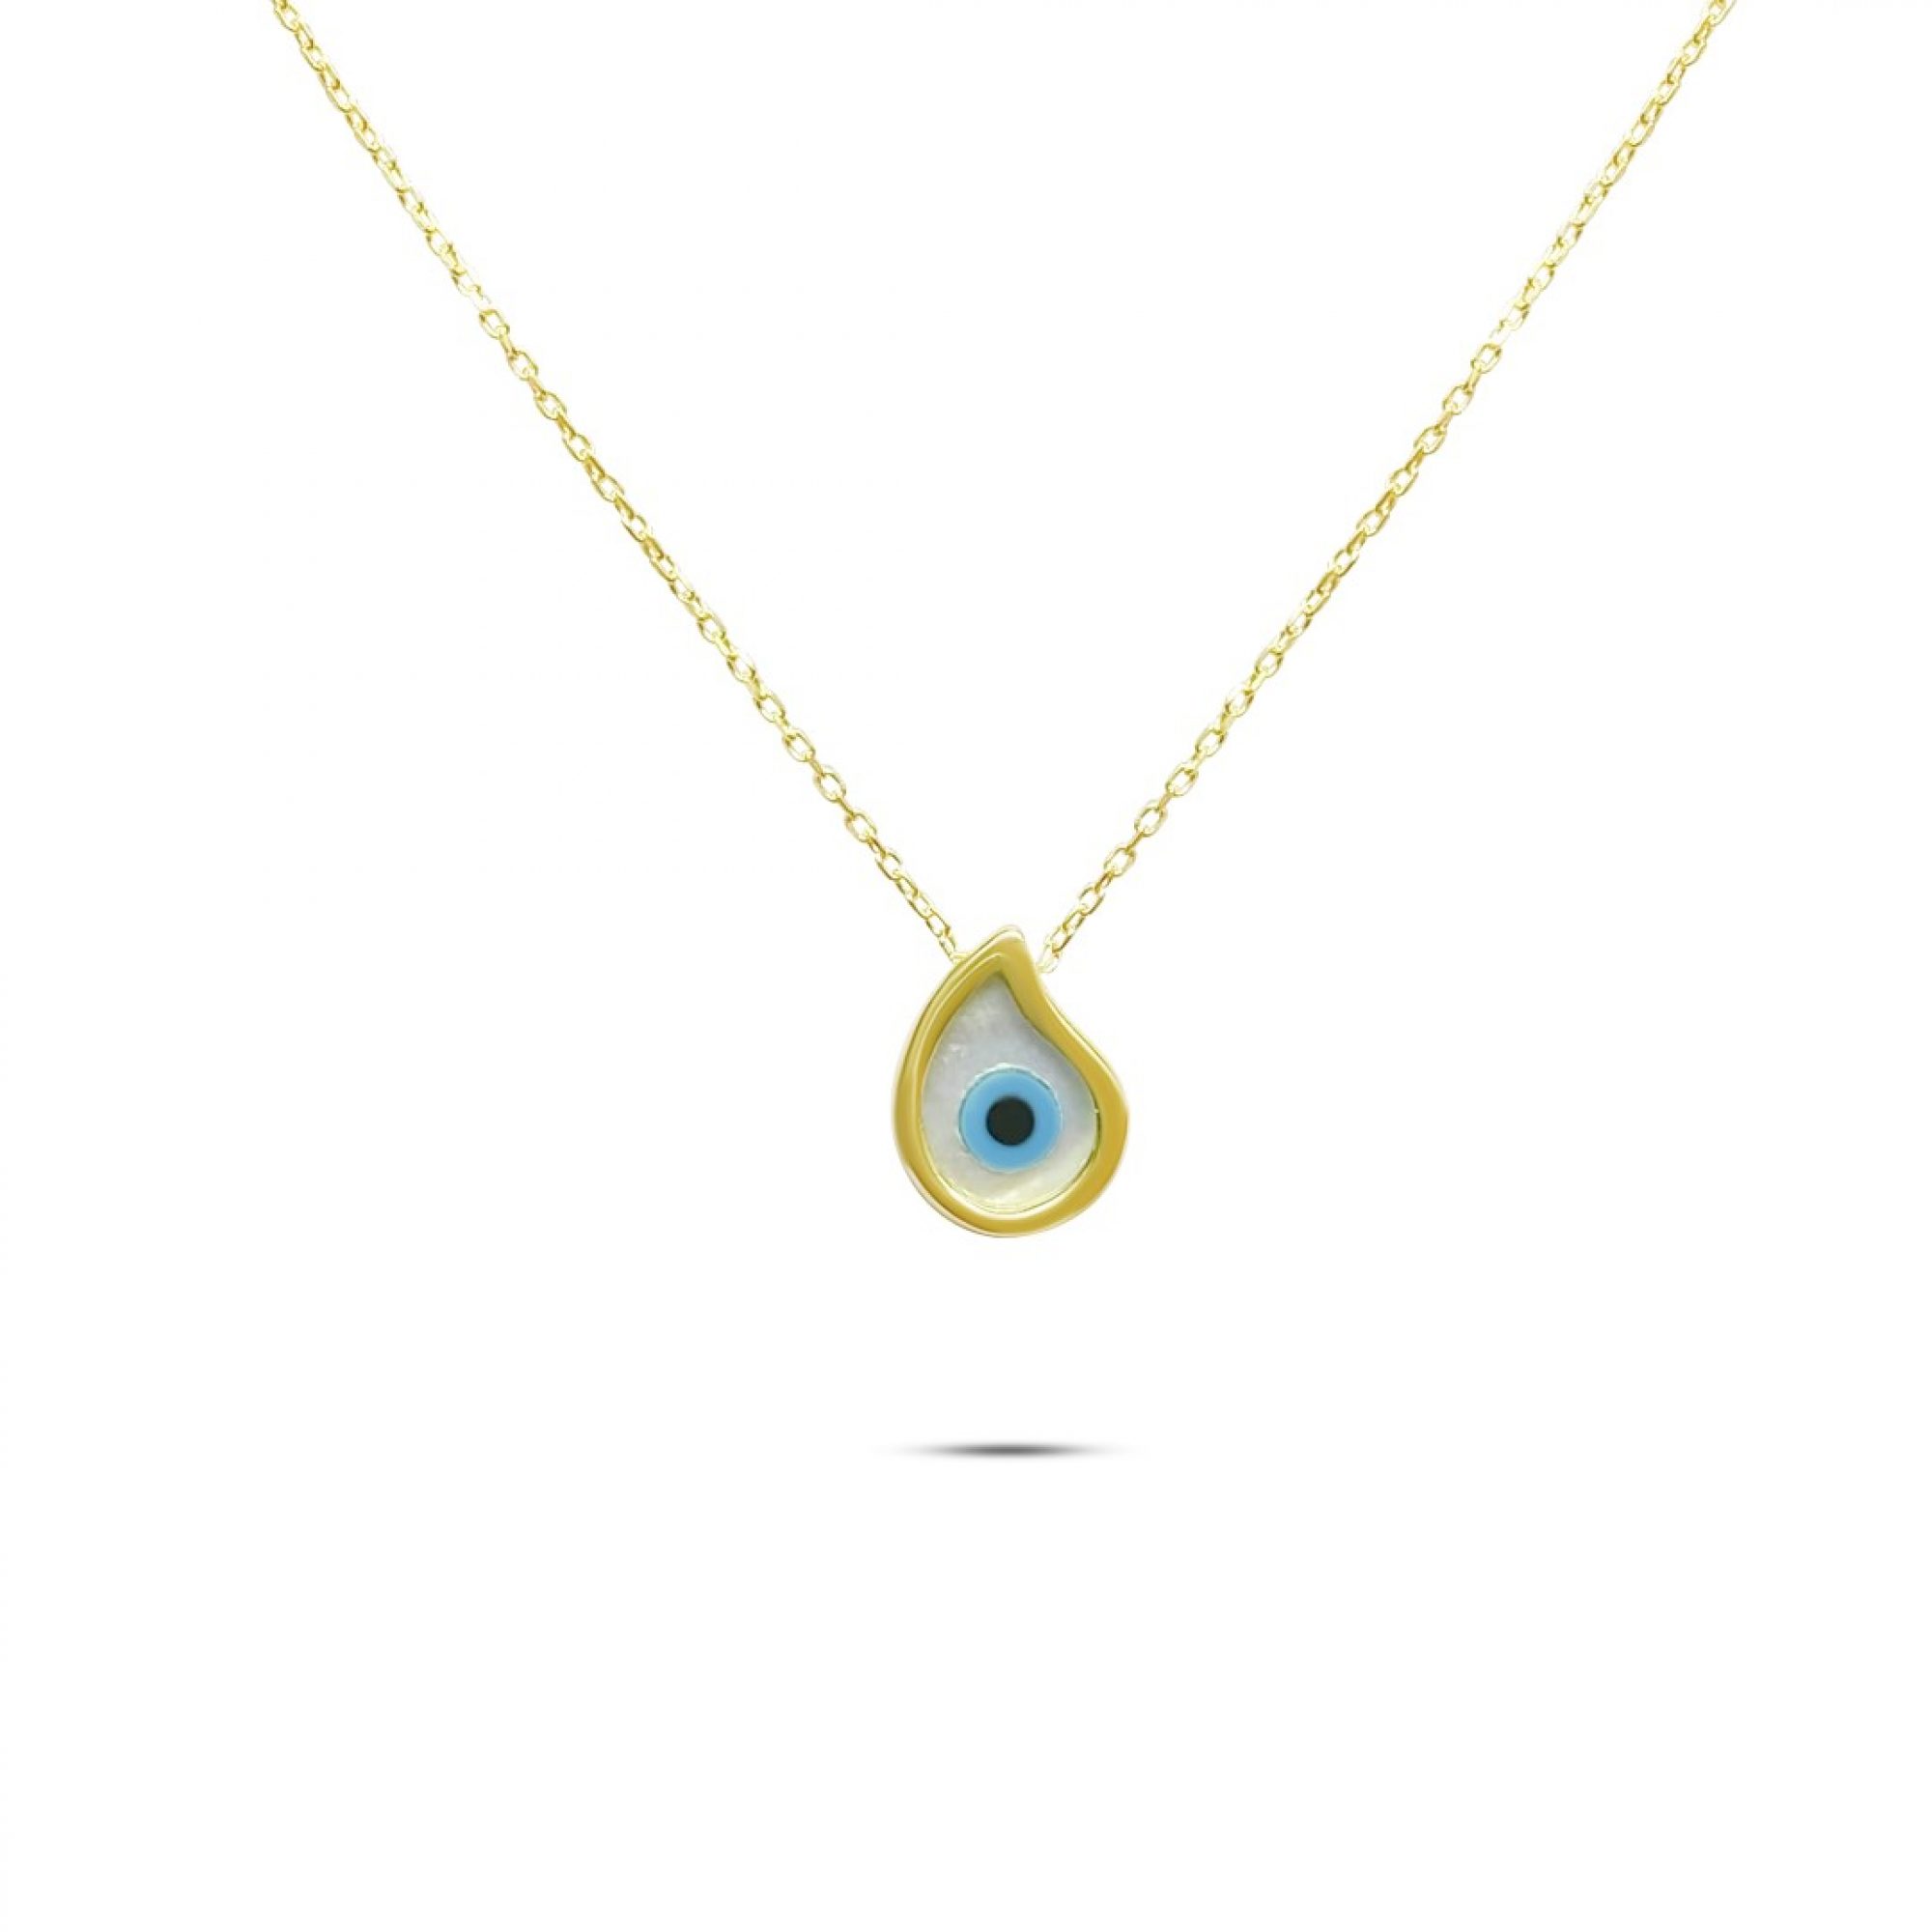 Gold plated eye necklace with mother of pearl